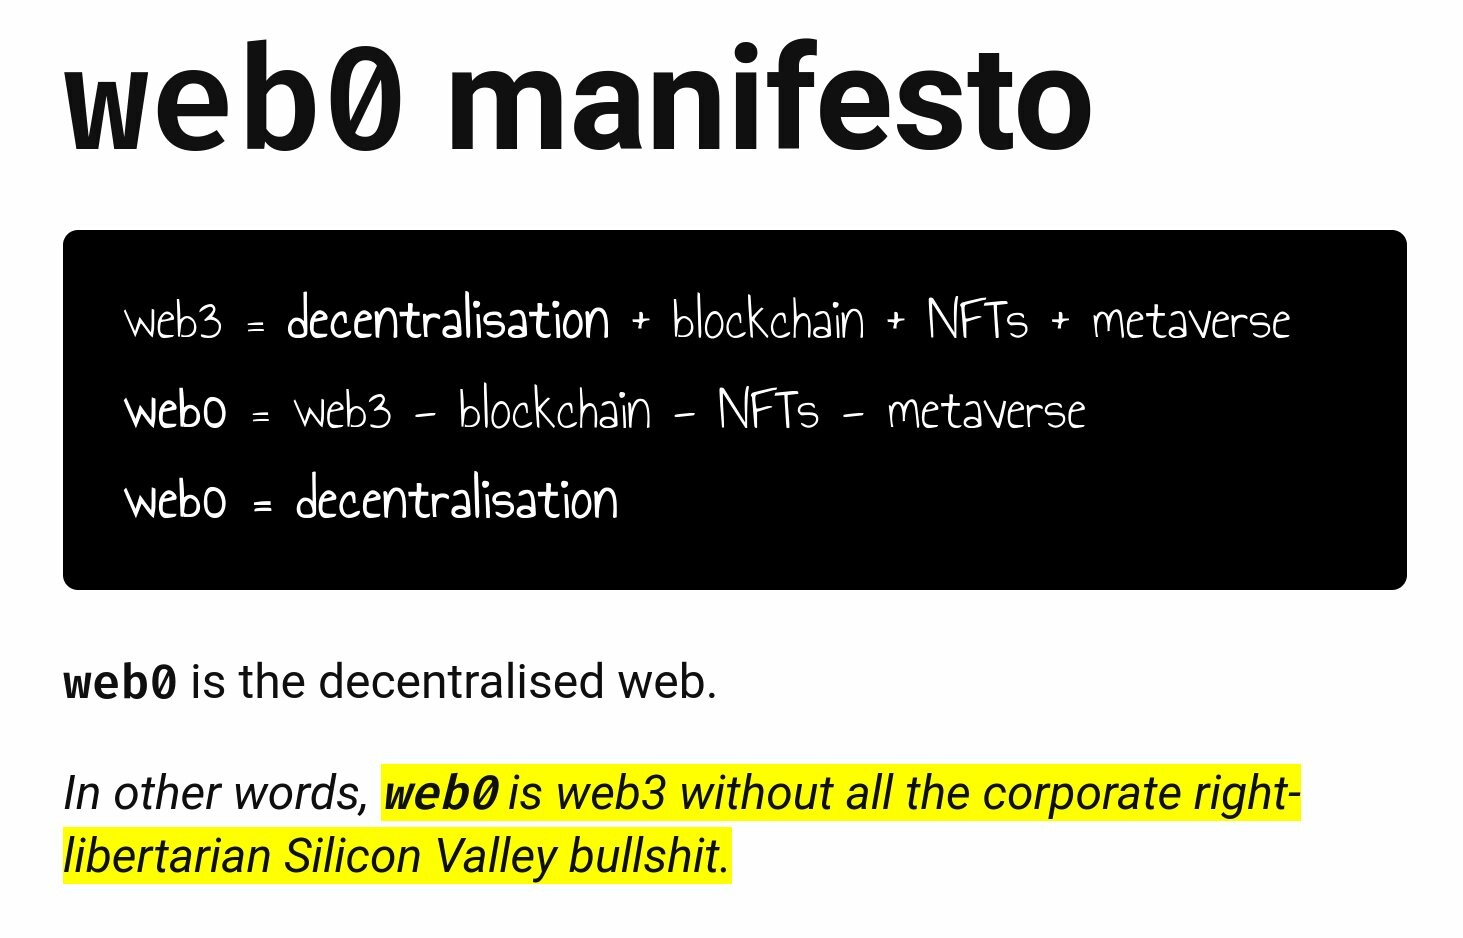 web0 manifesto<br><br>web3 = decentralisation + blockchain + NFTs + metaverse<br>web0 = web3 - blockchain - NFTs - metaverse<br>web0 = decentralisation<br>web0 is the decentralised web.<br><br>In other words, web0 is web3 without all the corporate right-libertarian Silicon Valley bullshit.